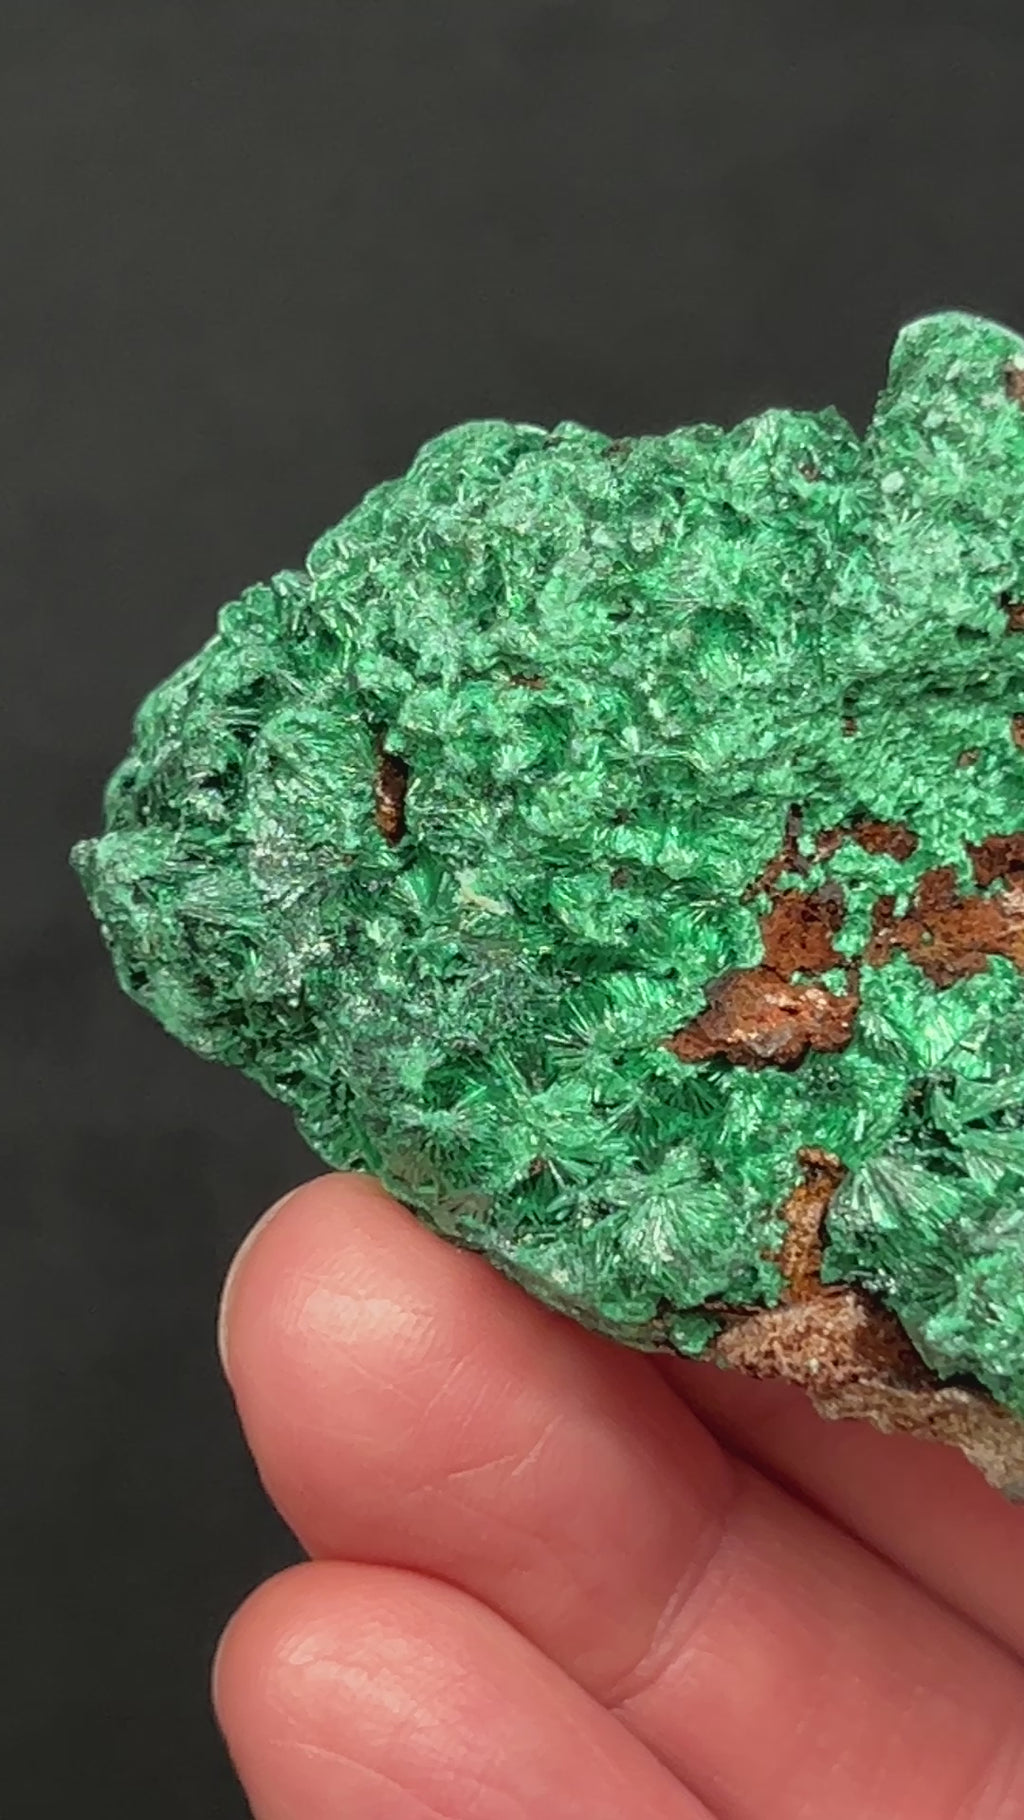  This gorgeous, very lustrous, shimmering Fibrous Malachite features sensational form and colors from green to predominantly dark, forest green.